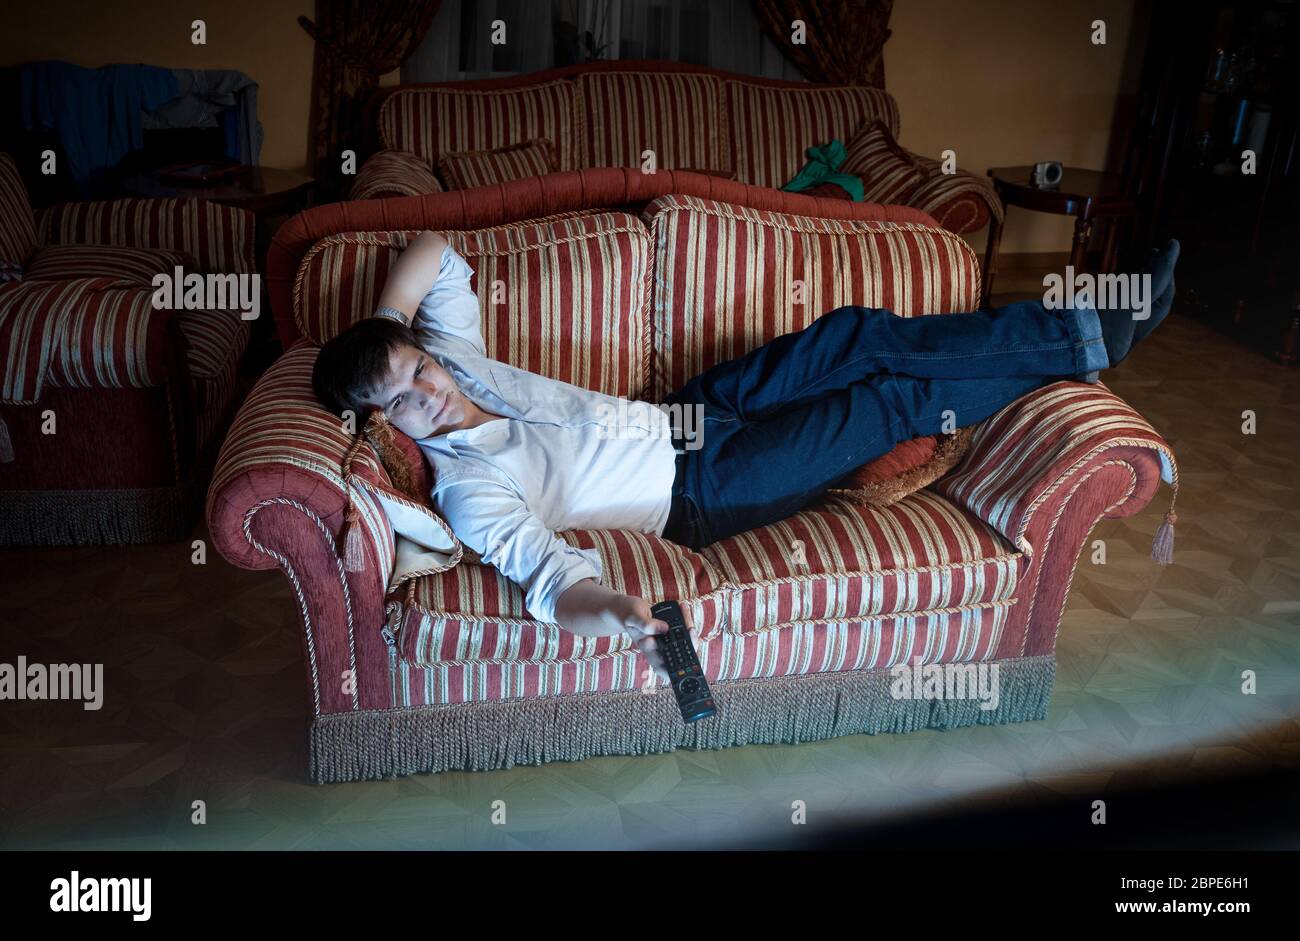 Portrait of man switching TV channels on sofa at night Stock Photo